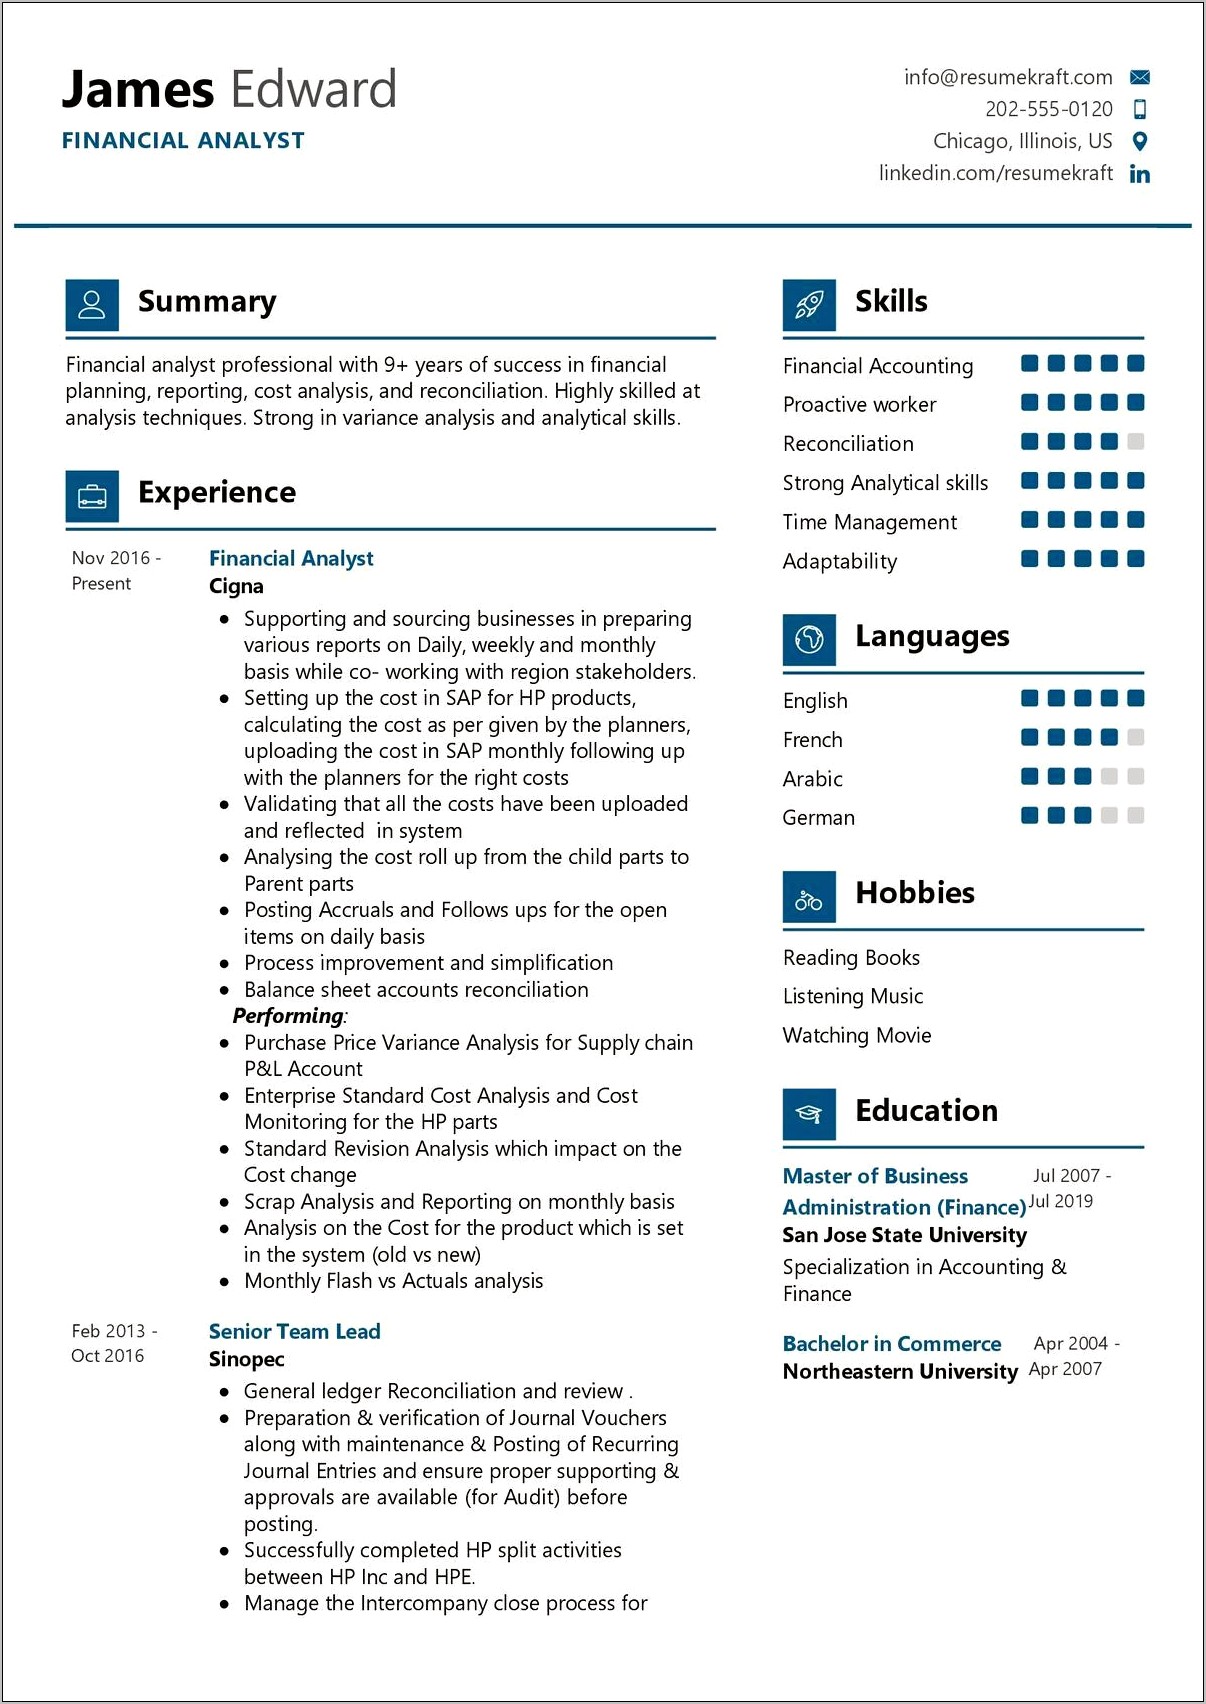 Best Resume Templetes For Financial Analyst